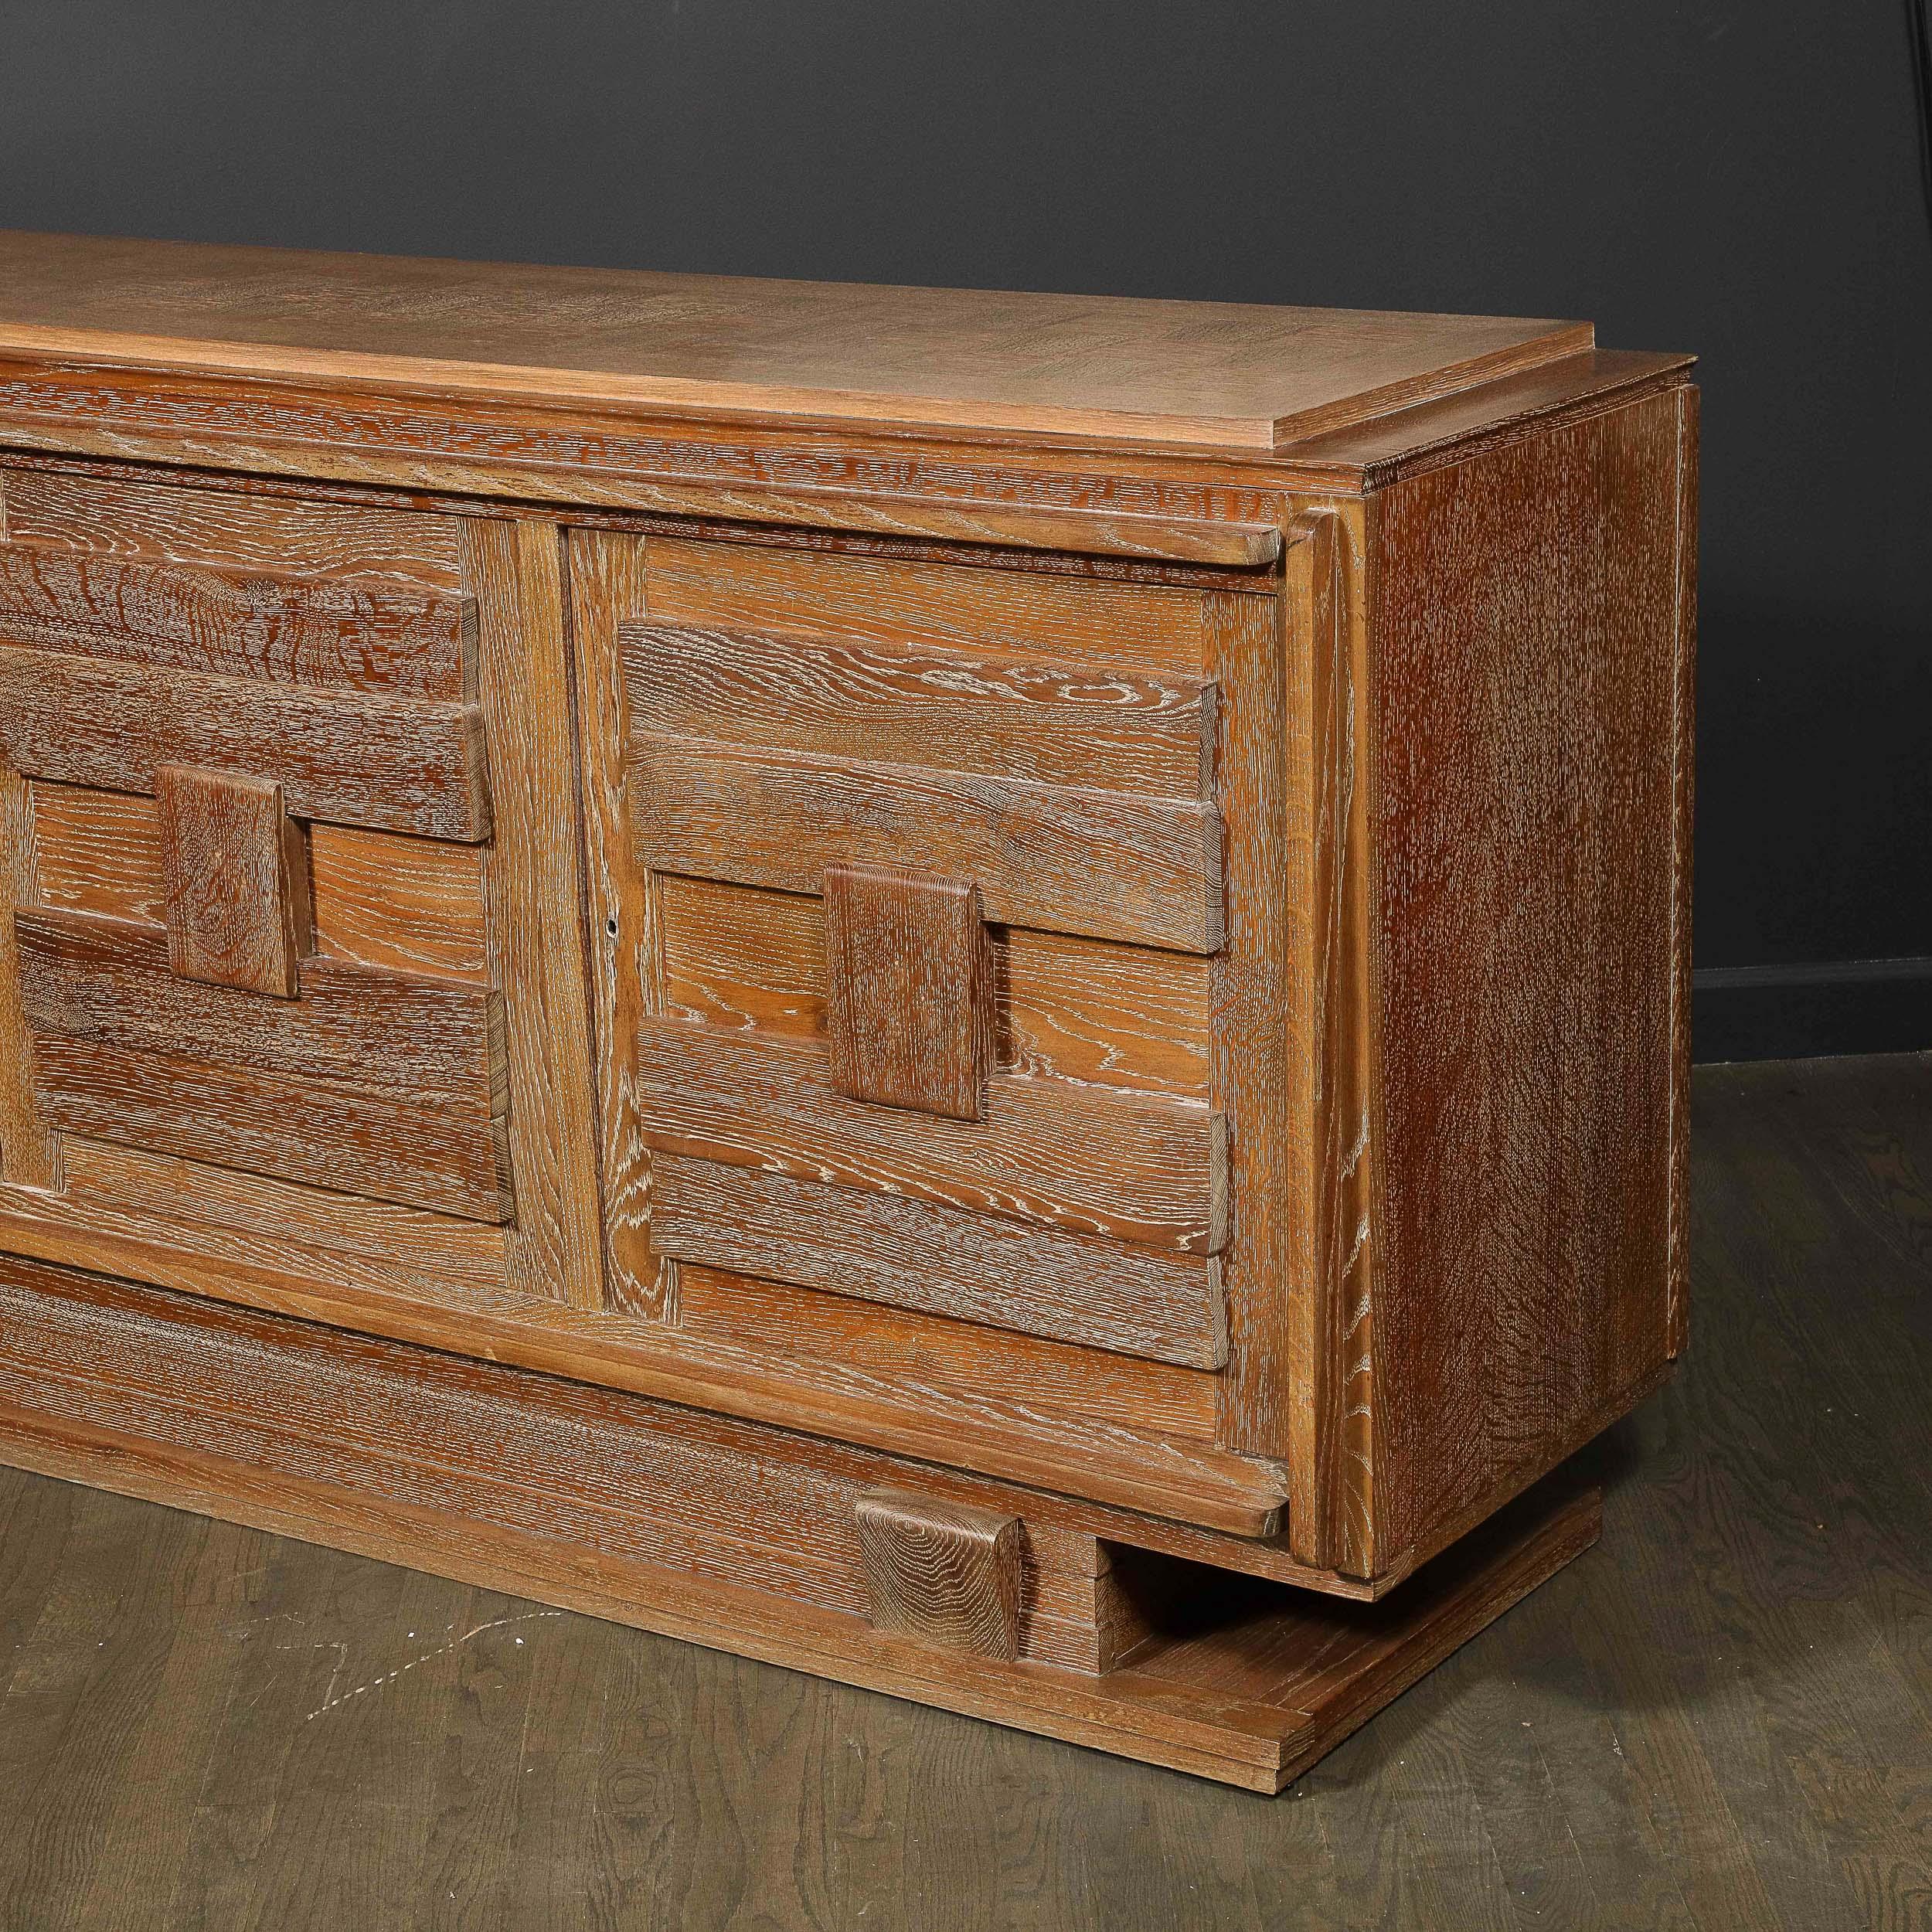 1950s French Mid-Century Modern Geometric Limed Oak Cabinet with Plinth Base 4